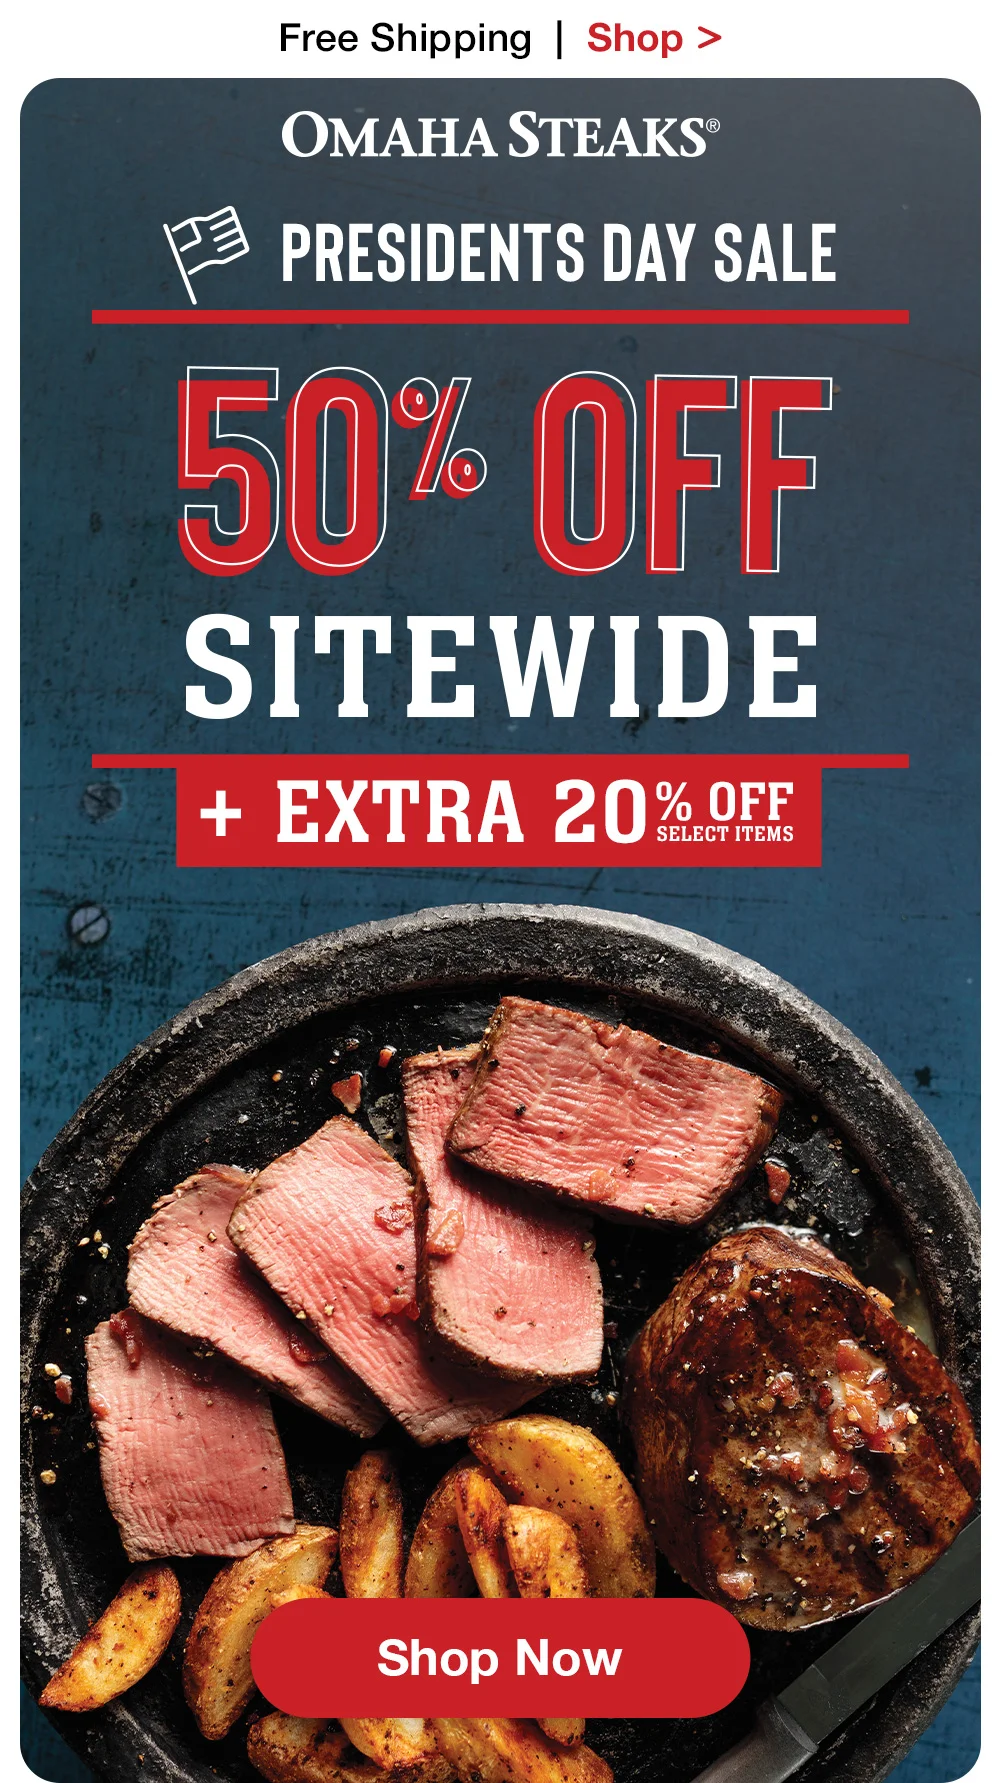 Free Shipping | Shop > OMAHA STEAKS® | PRESIDENTS DAY SALE - 50% OFF SITEWIDE + EXTRA 20% OFF SELECT ITEMS || SHOP NOW